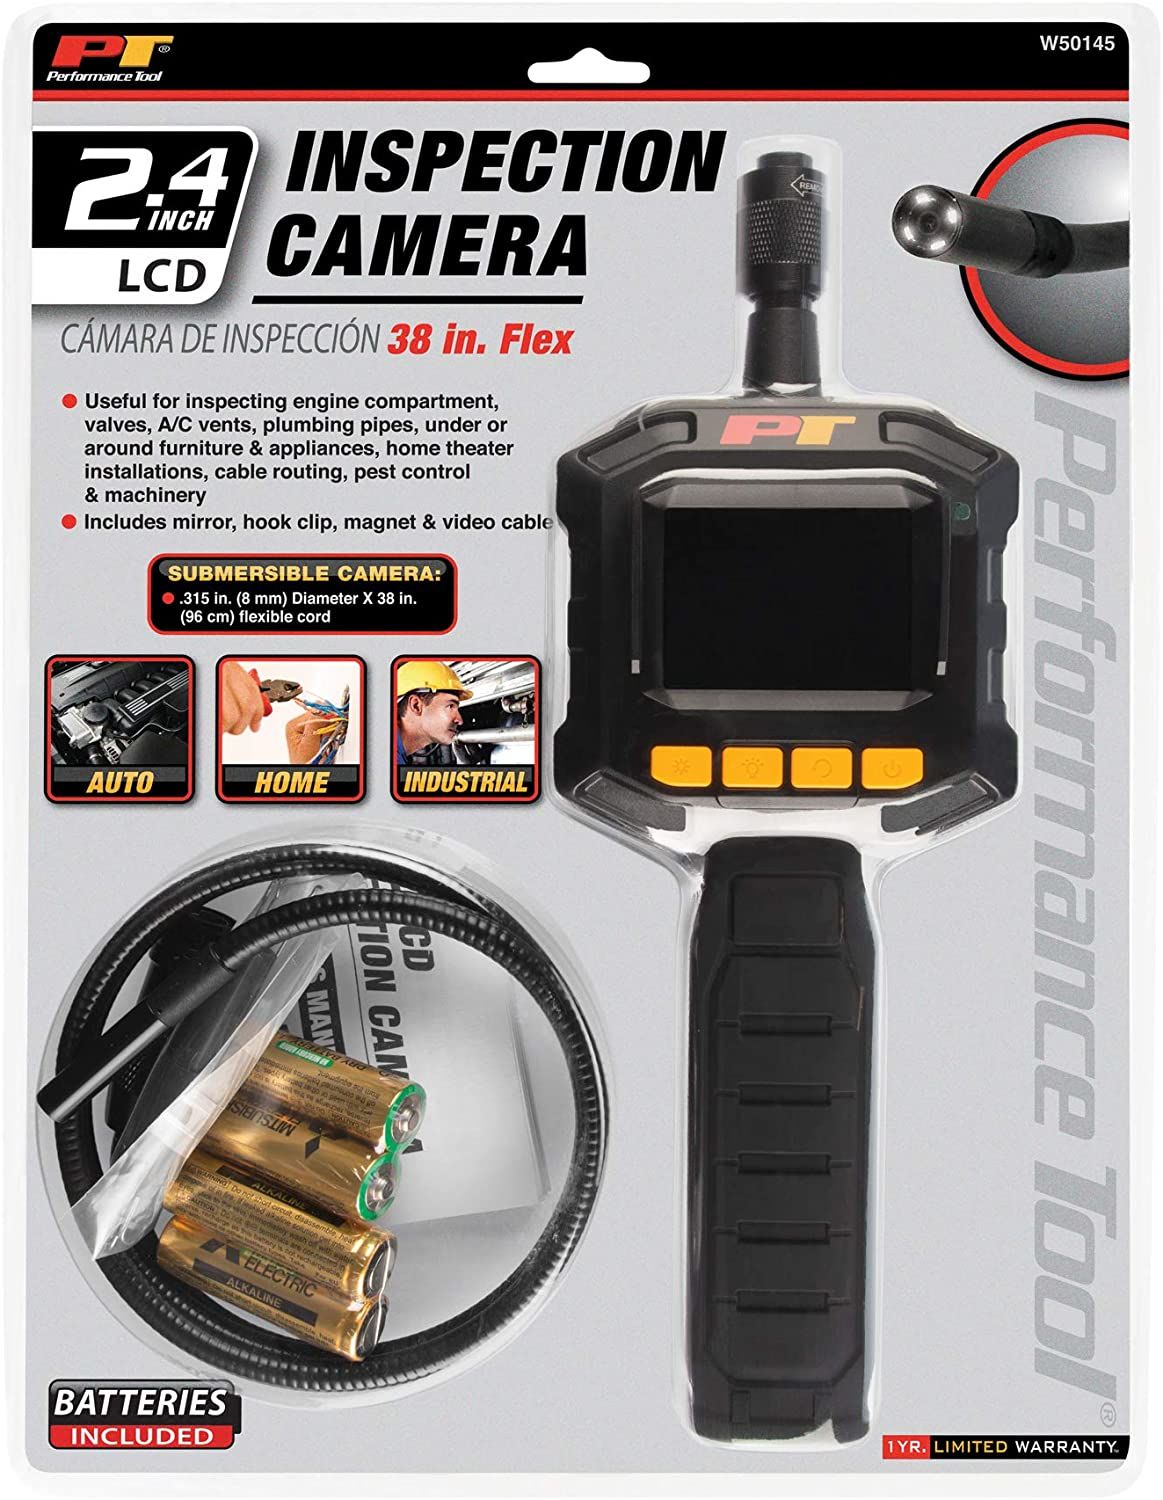 Performance Tools W50145 - LCD 2.4" Inspection Caméra